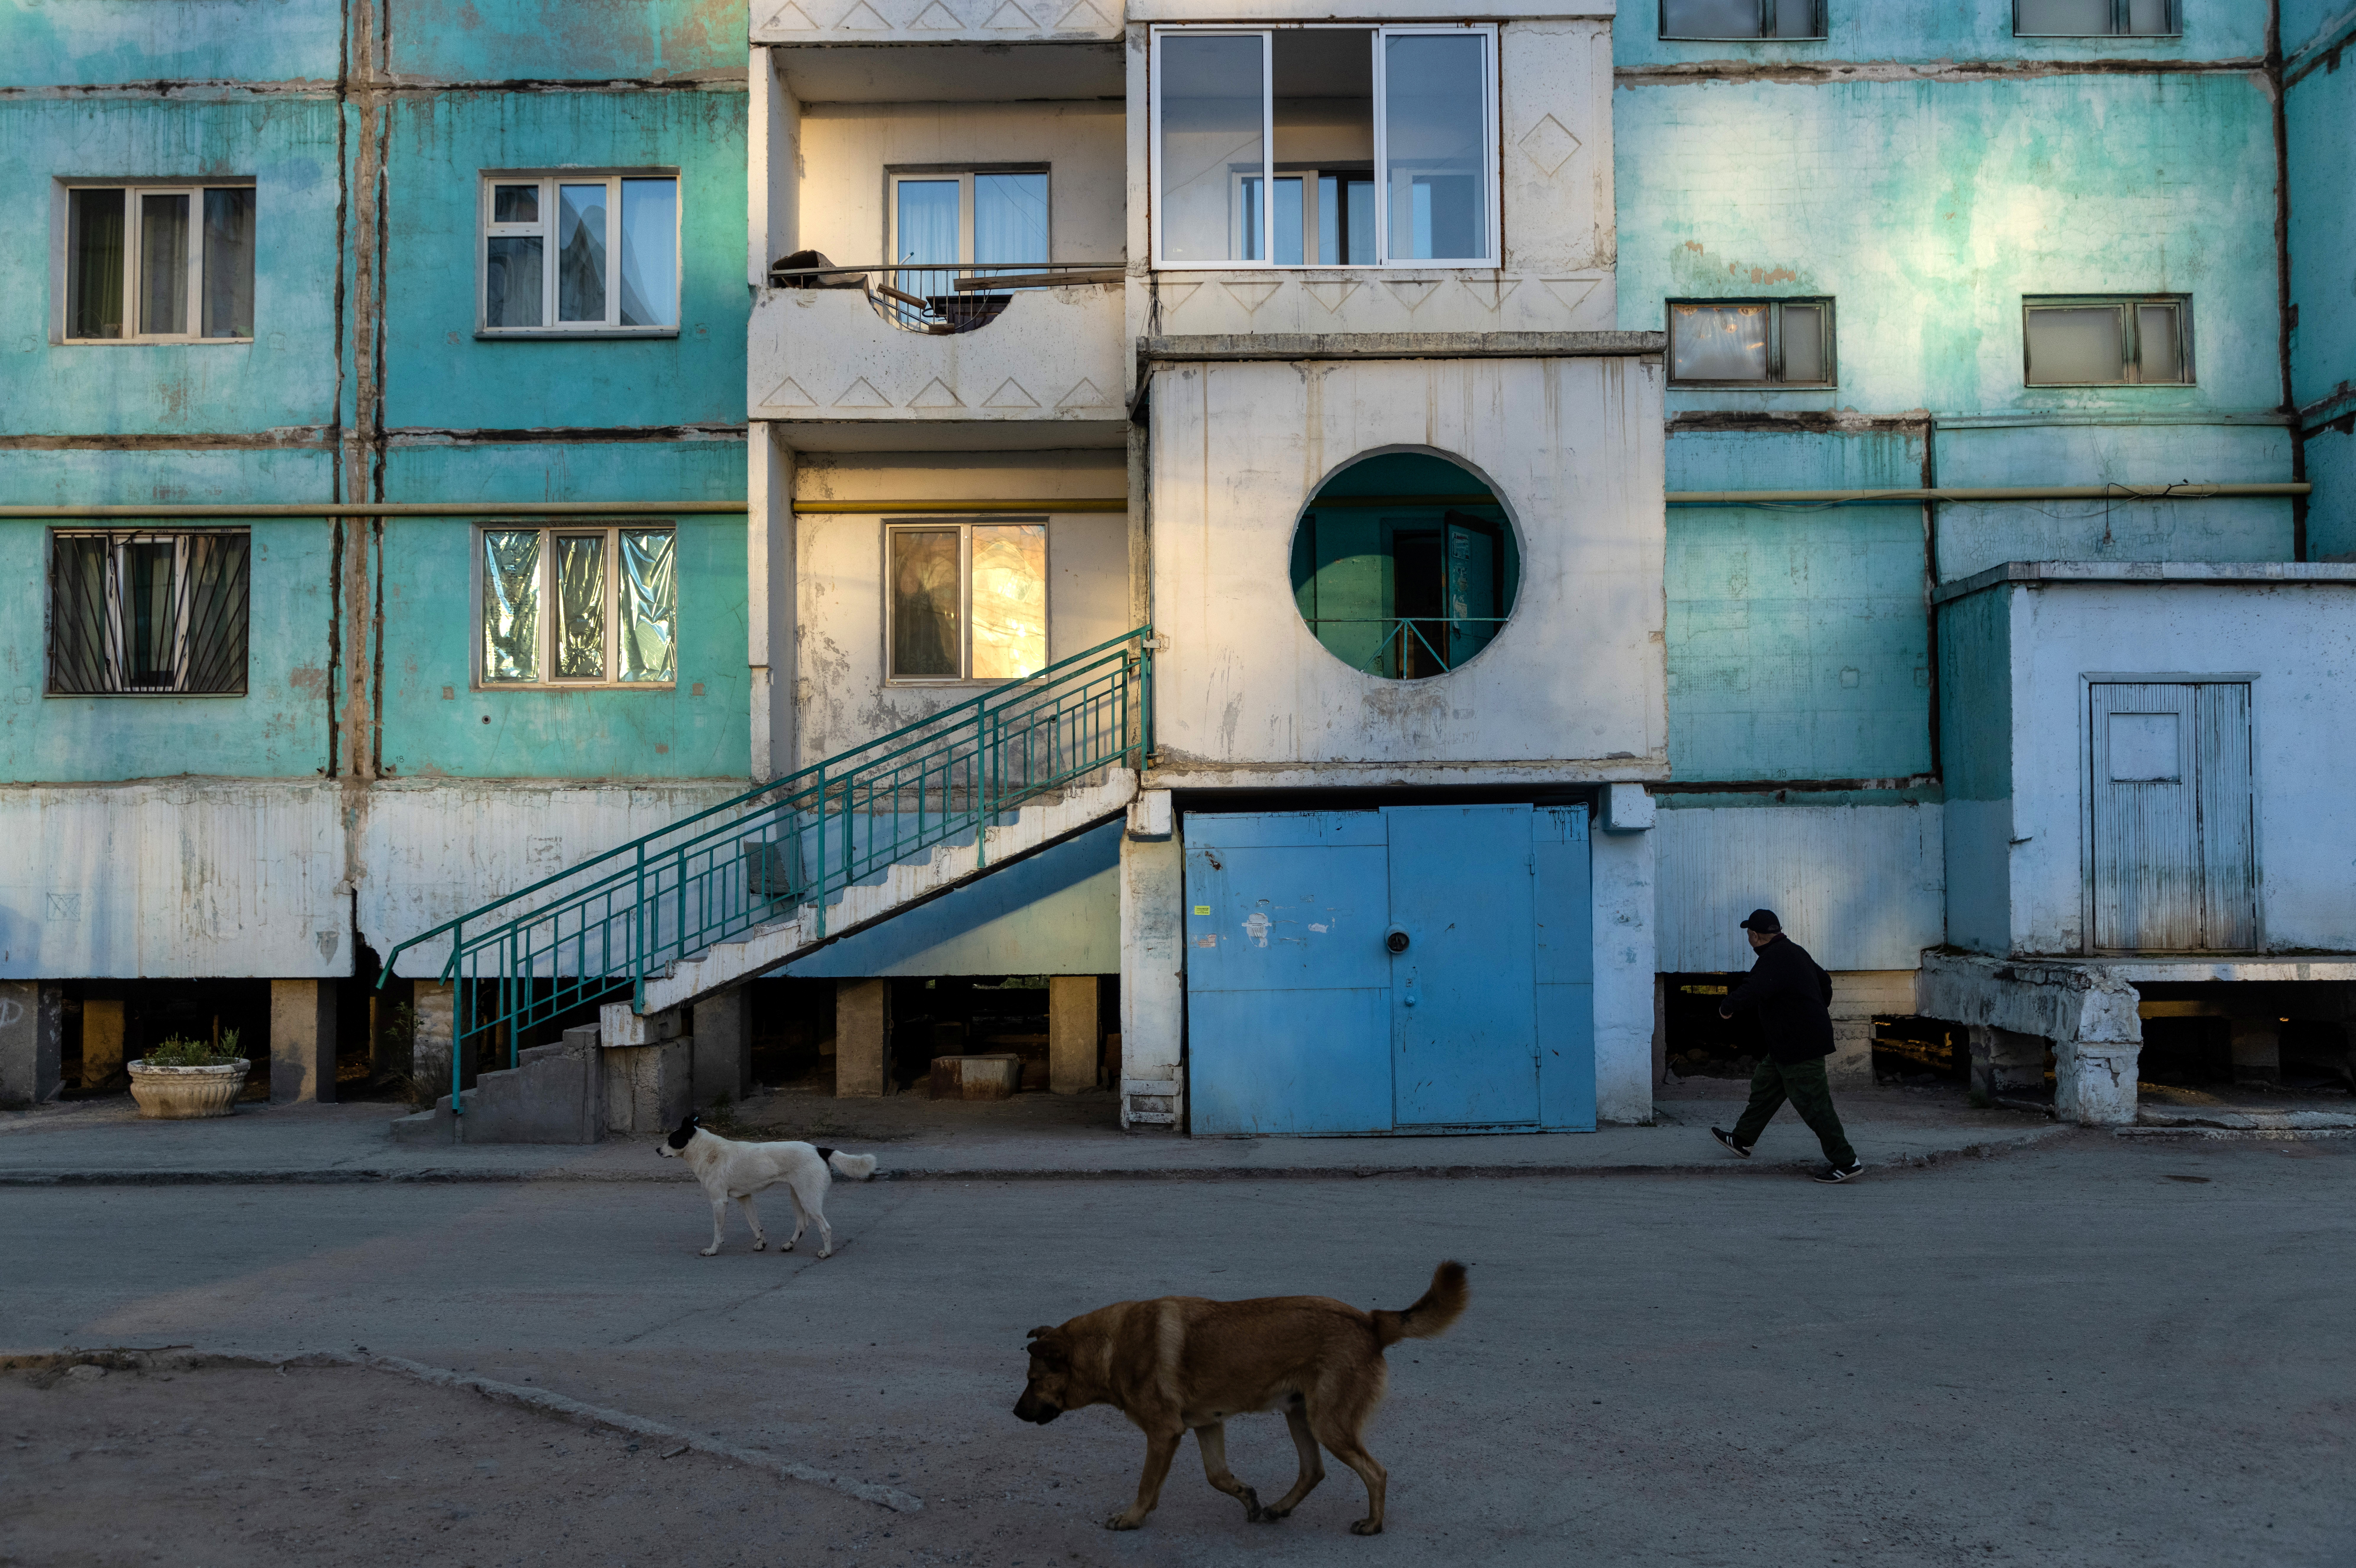 A man and stray dogs pass by a residential block constructed on stilts early morning in Yakutsk